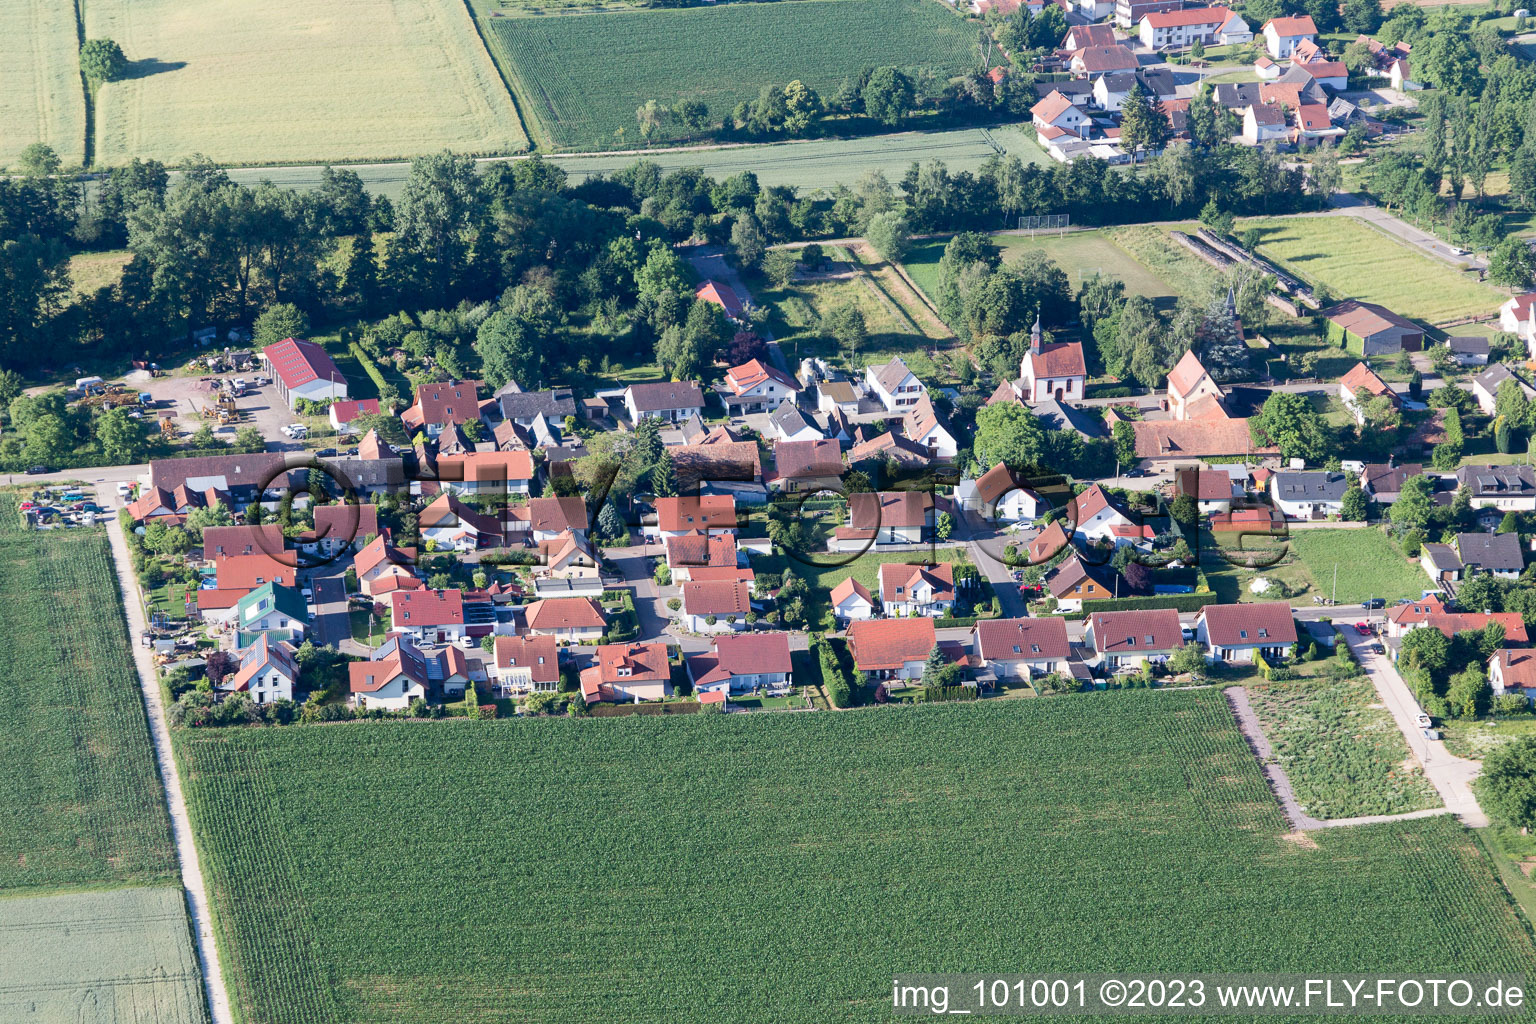 Niederotterbach in the state Rhineland-Palatinate, Germany from above